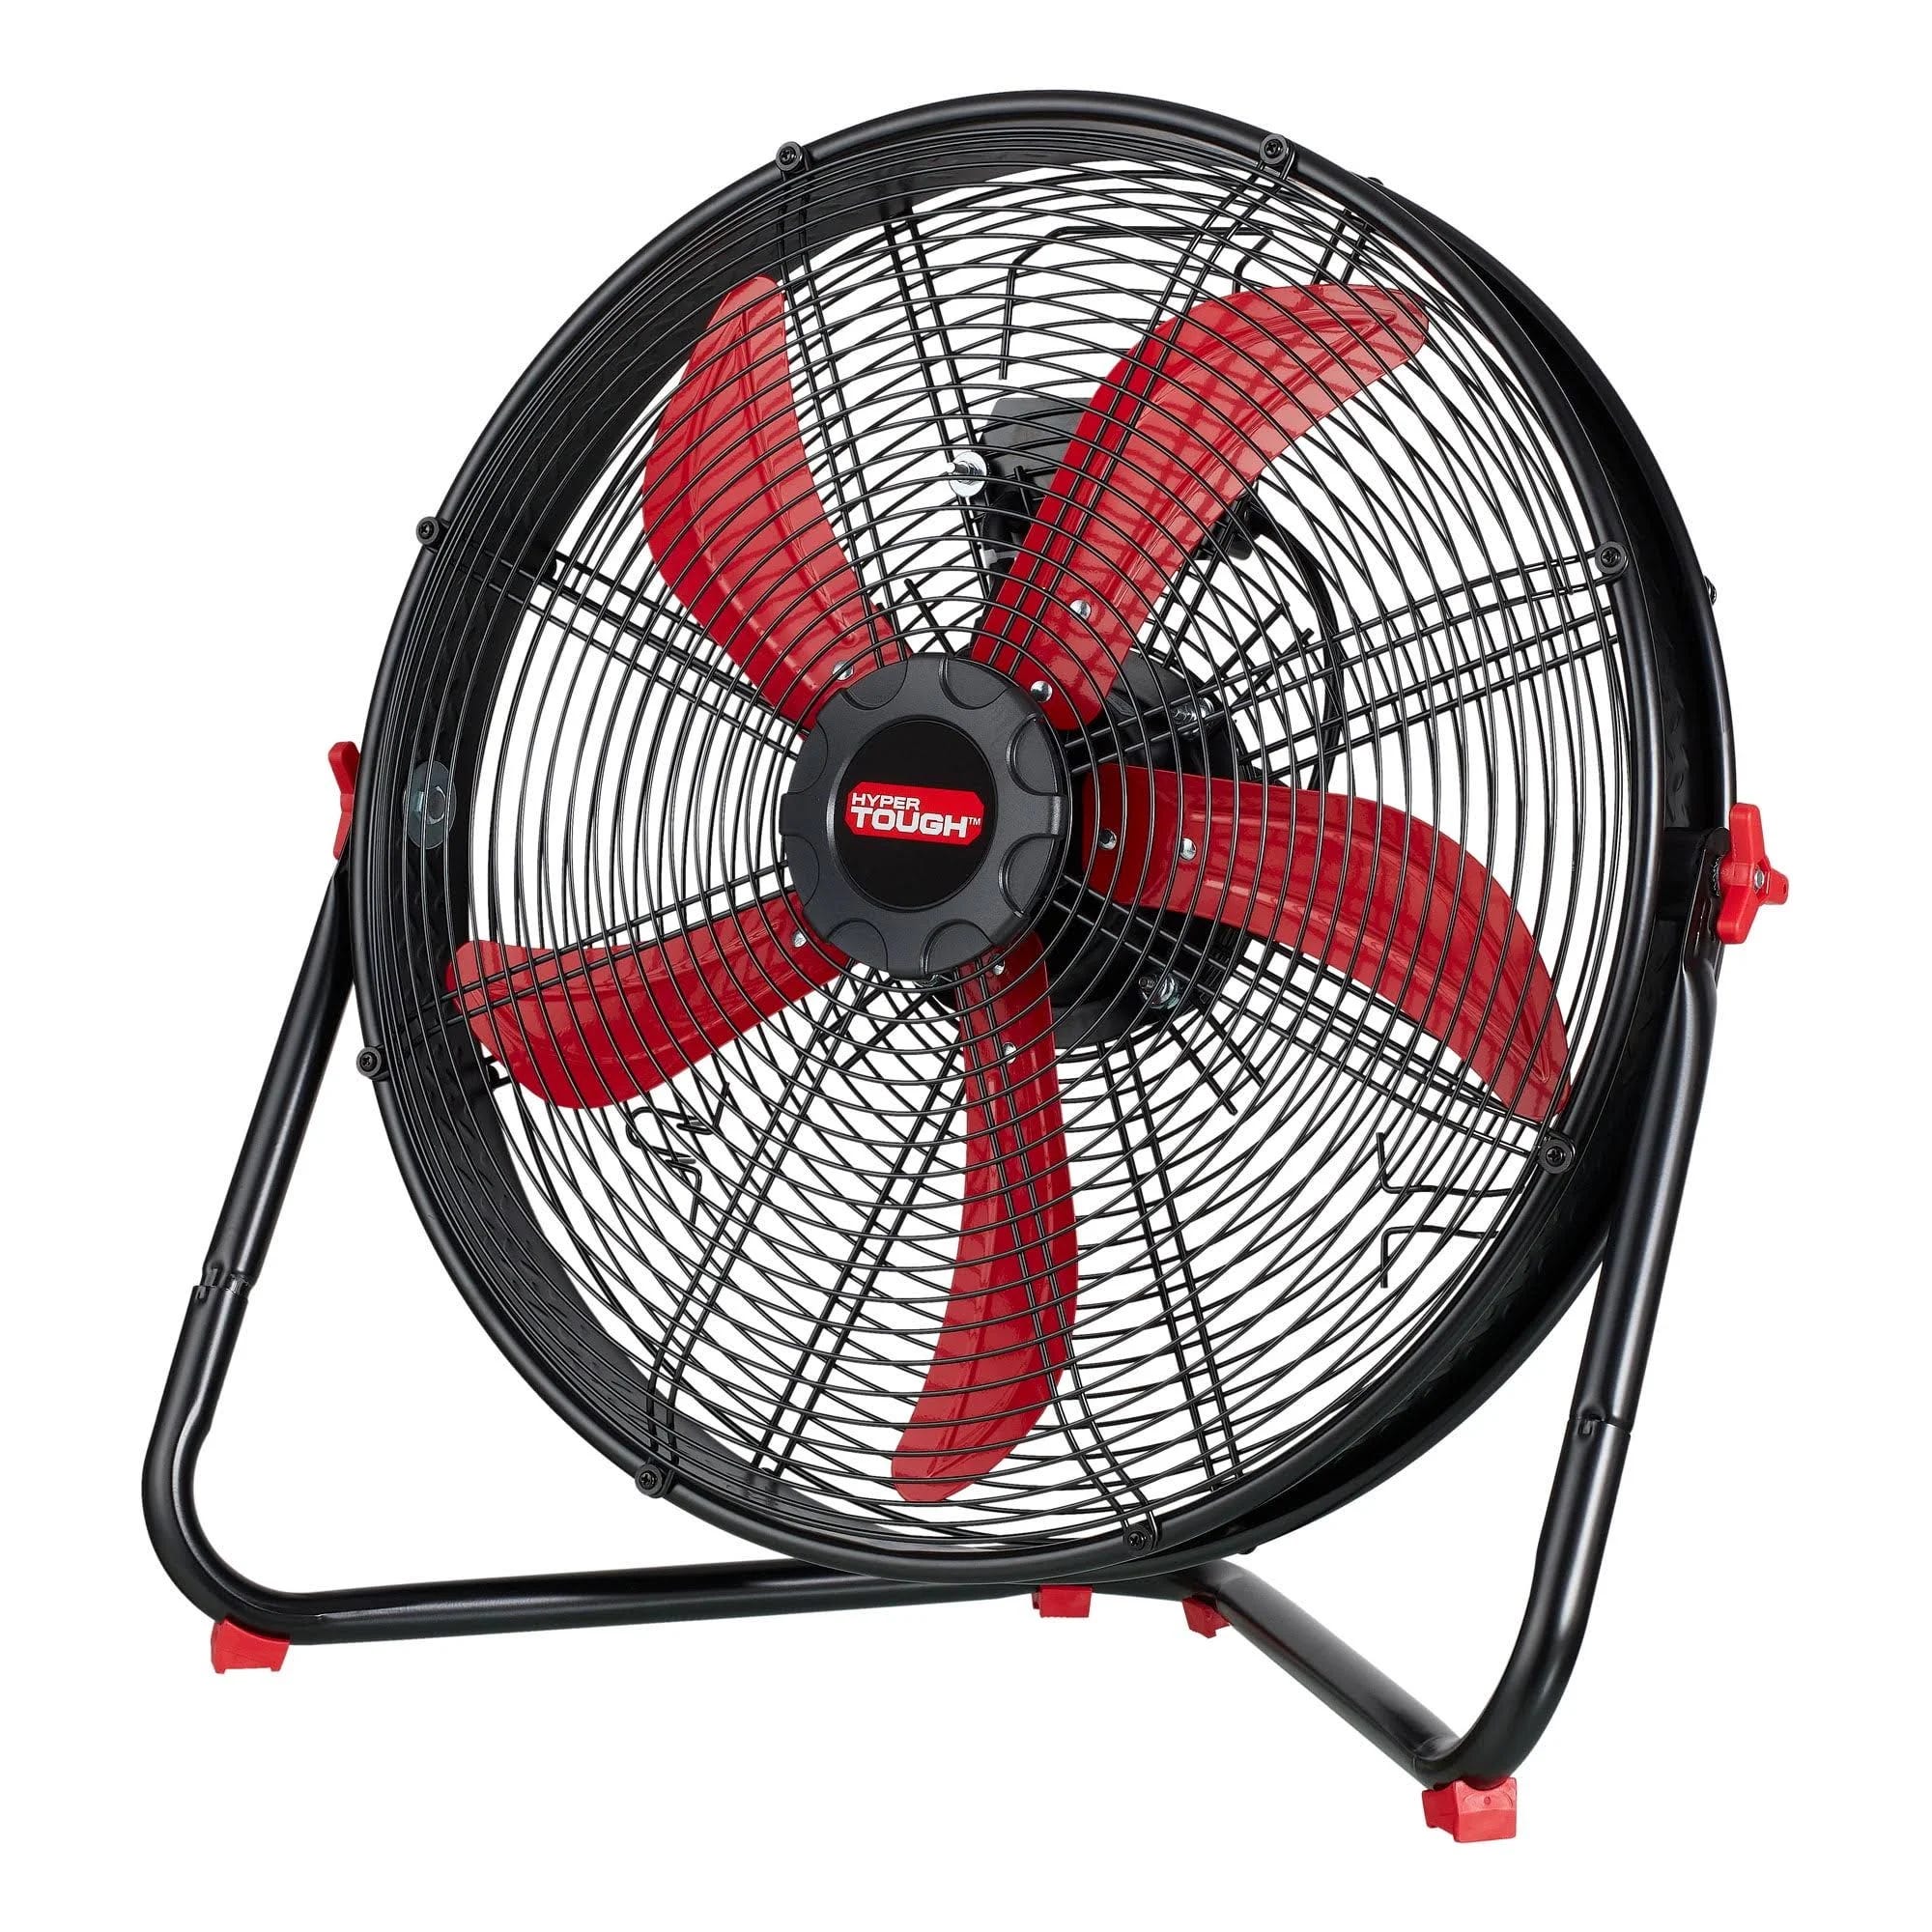 Stylish and Powerful Sealed Motor Drum Fan for Efficient Cooling | Image